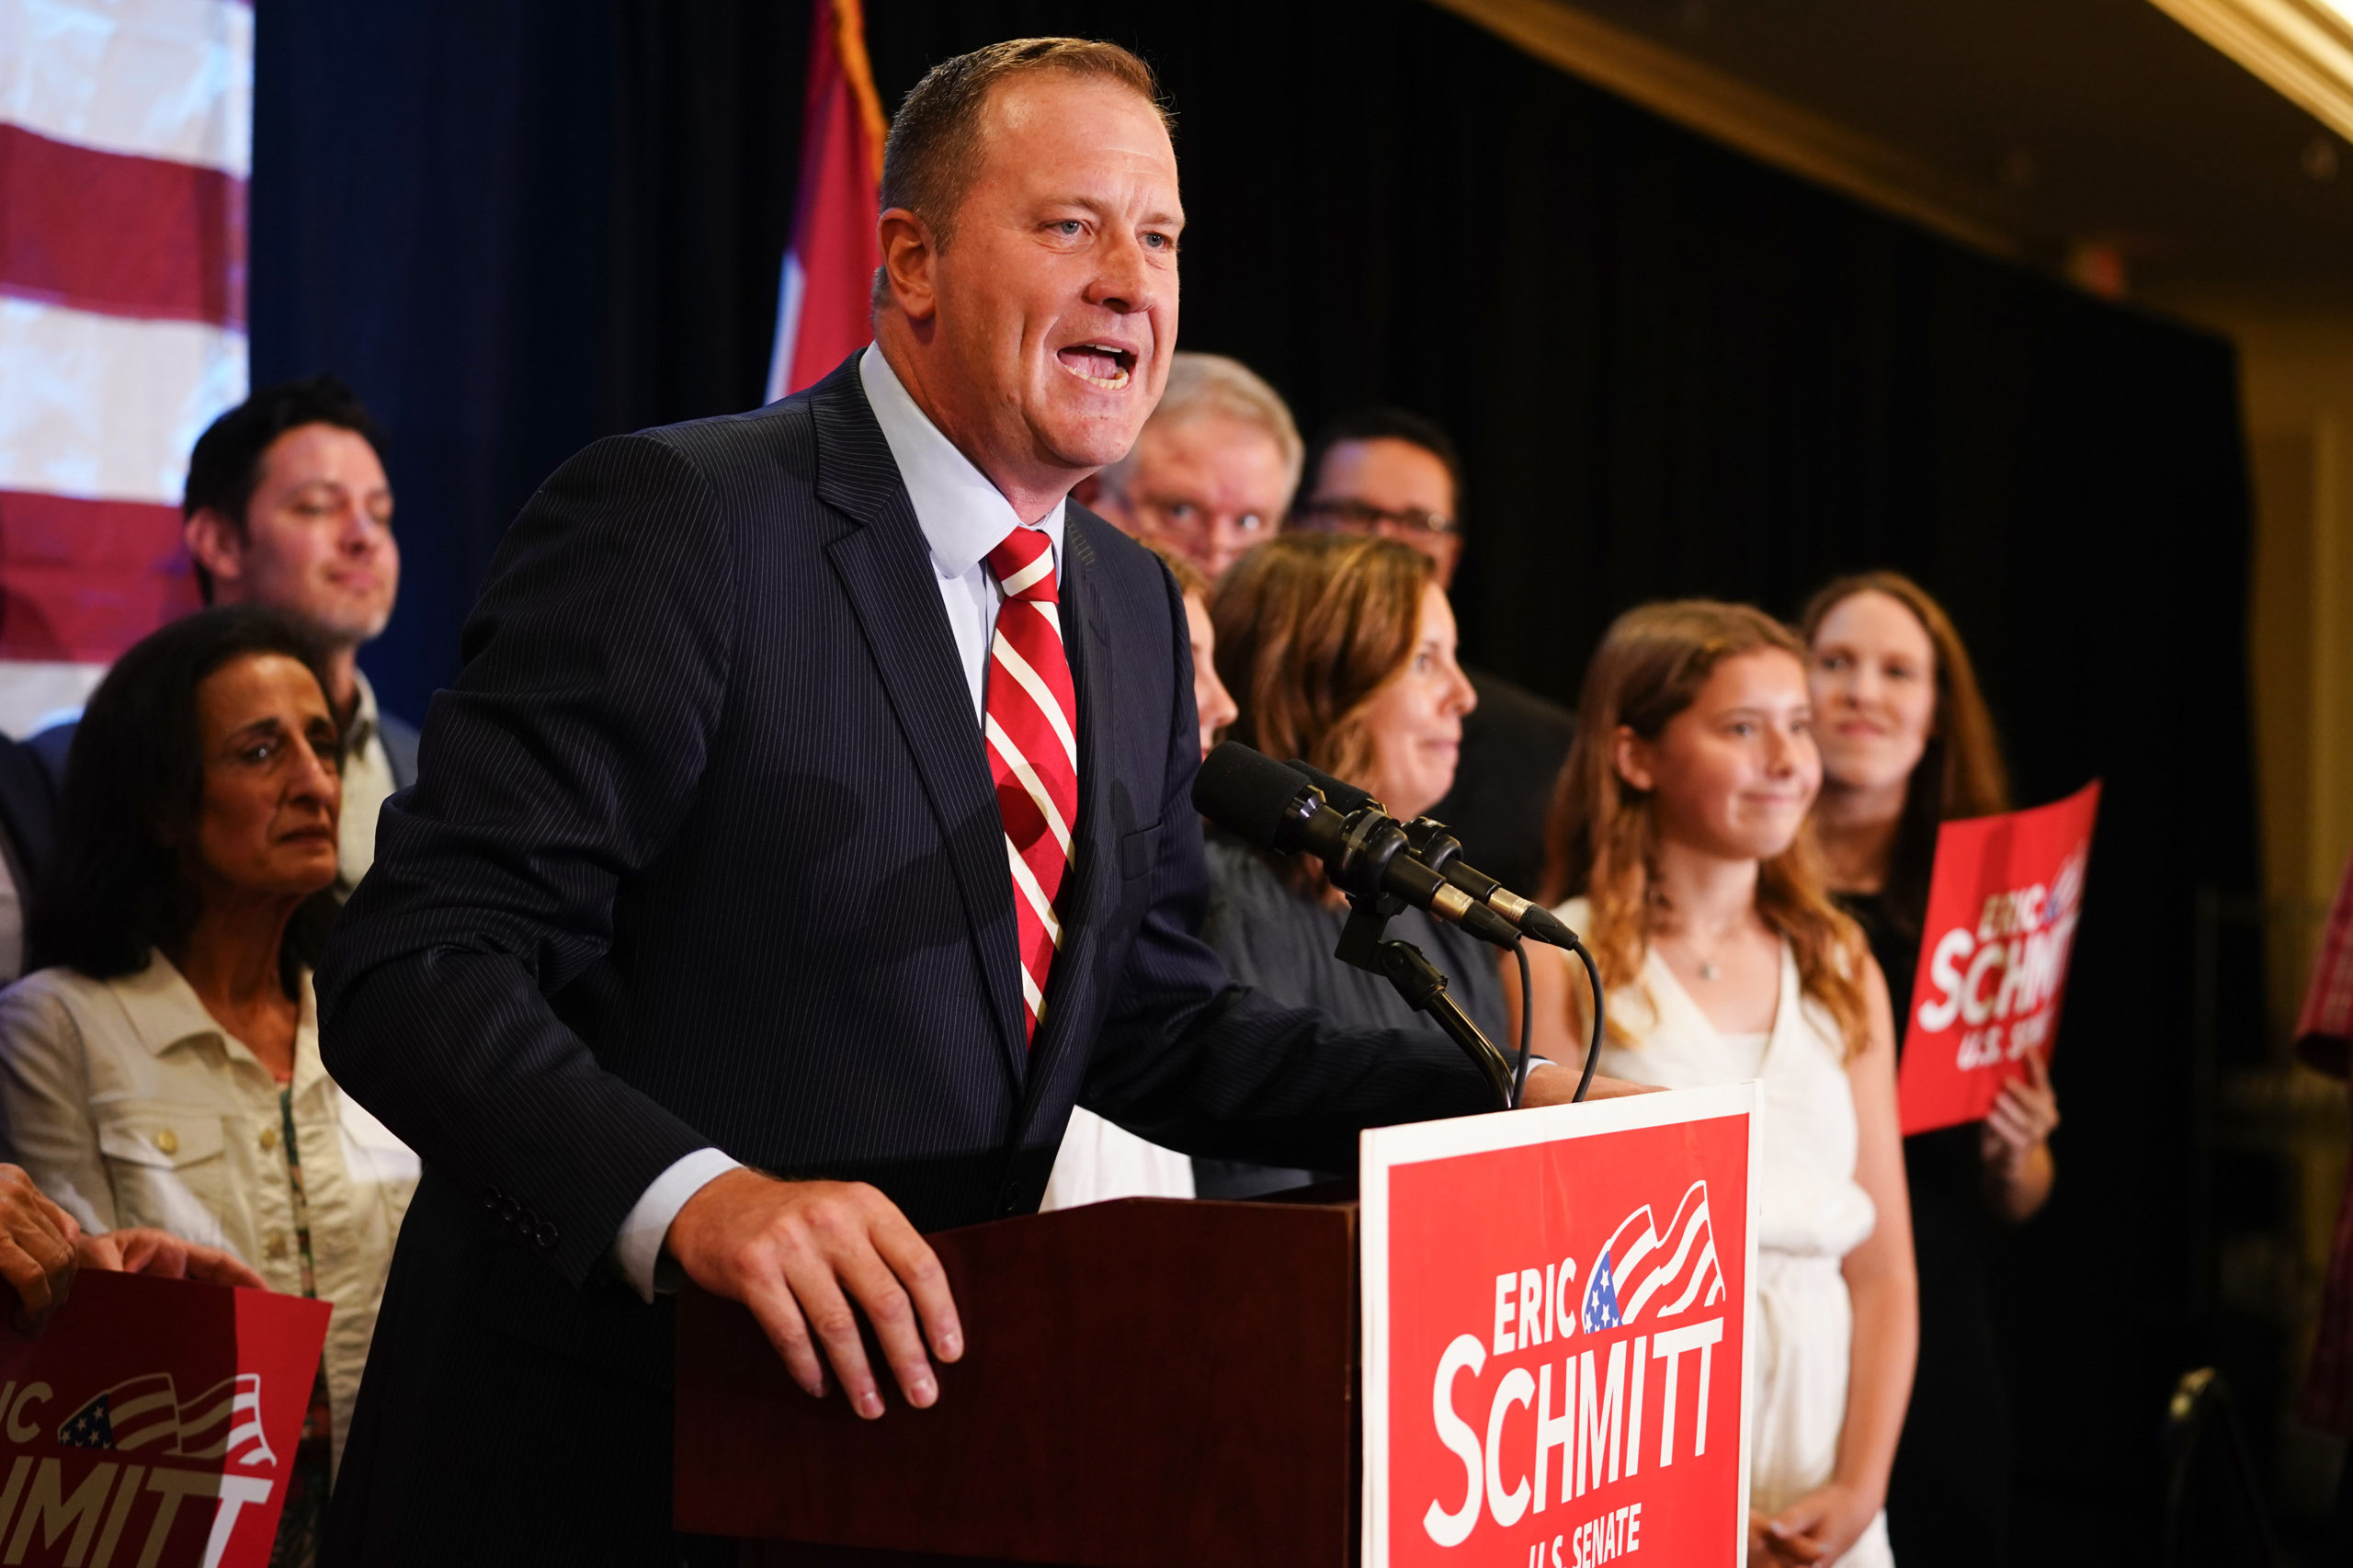 ST. LOUIS, MISSOURI - AUGUST 02: State Attorney General Eric Schmitt speaks at an election-night gathering after winning the Republican primary for U.S. Senate at the Sheraton in Westport Plaza on August 02, 2022 in St Louis, Missouri. Schmitt defeated former Gov. Eric Greitens and U.S. Rep. Vicky Hartzler for the Republican nomination to replace Republican Sen. Roy Blunt, who decided not to seek a third term. (Photo by Kyle Rivas/Getty Images)